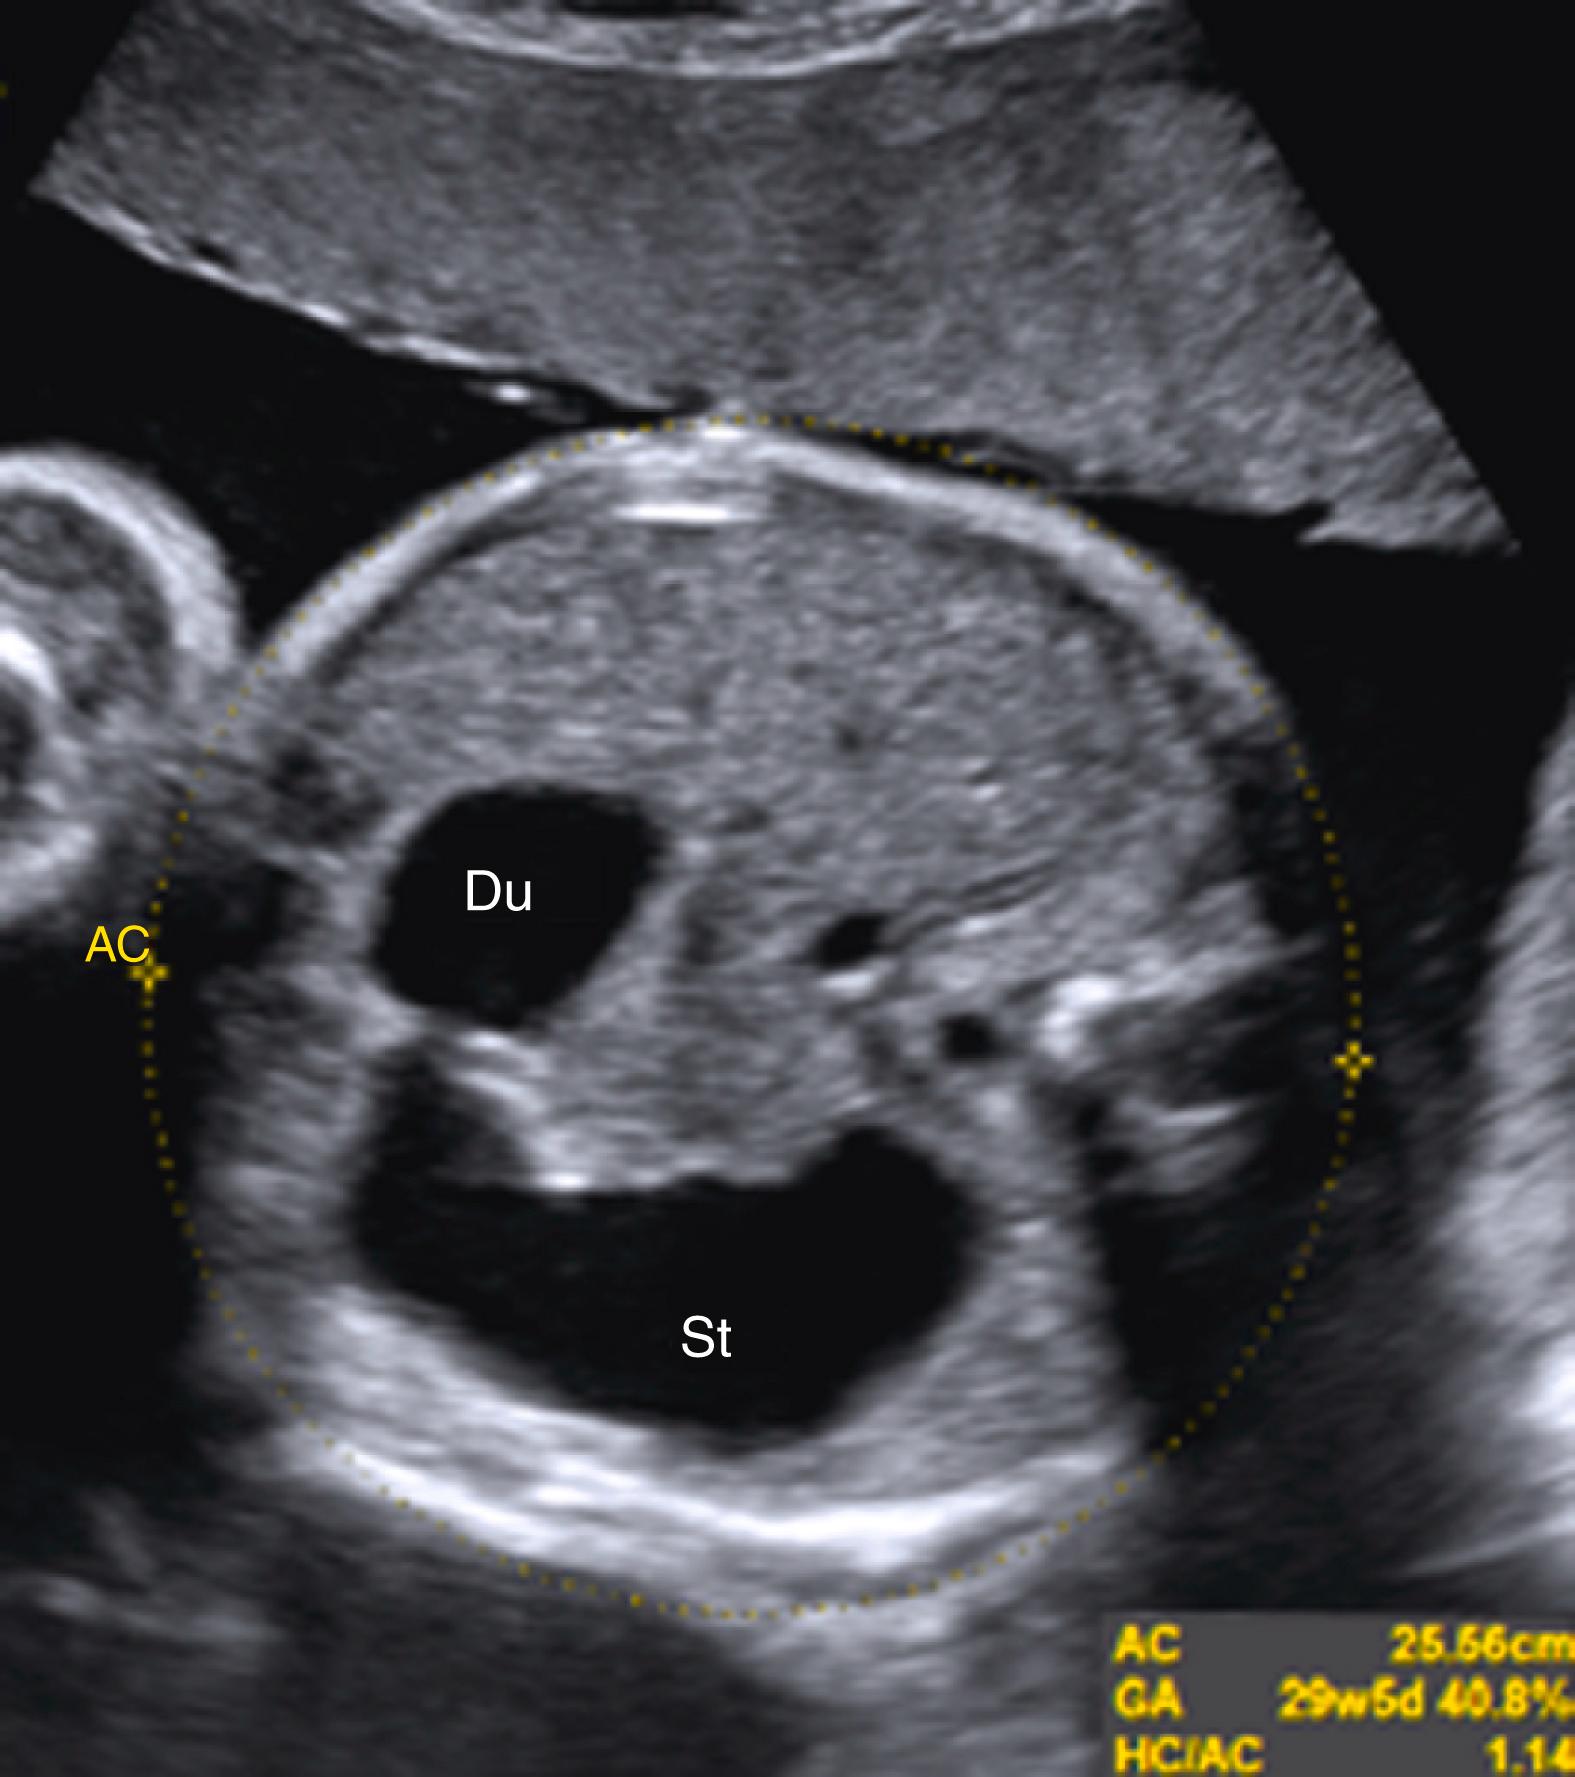 Figure 24.8, Distended stomach (St) with duodenal atresia.